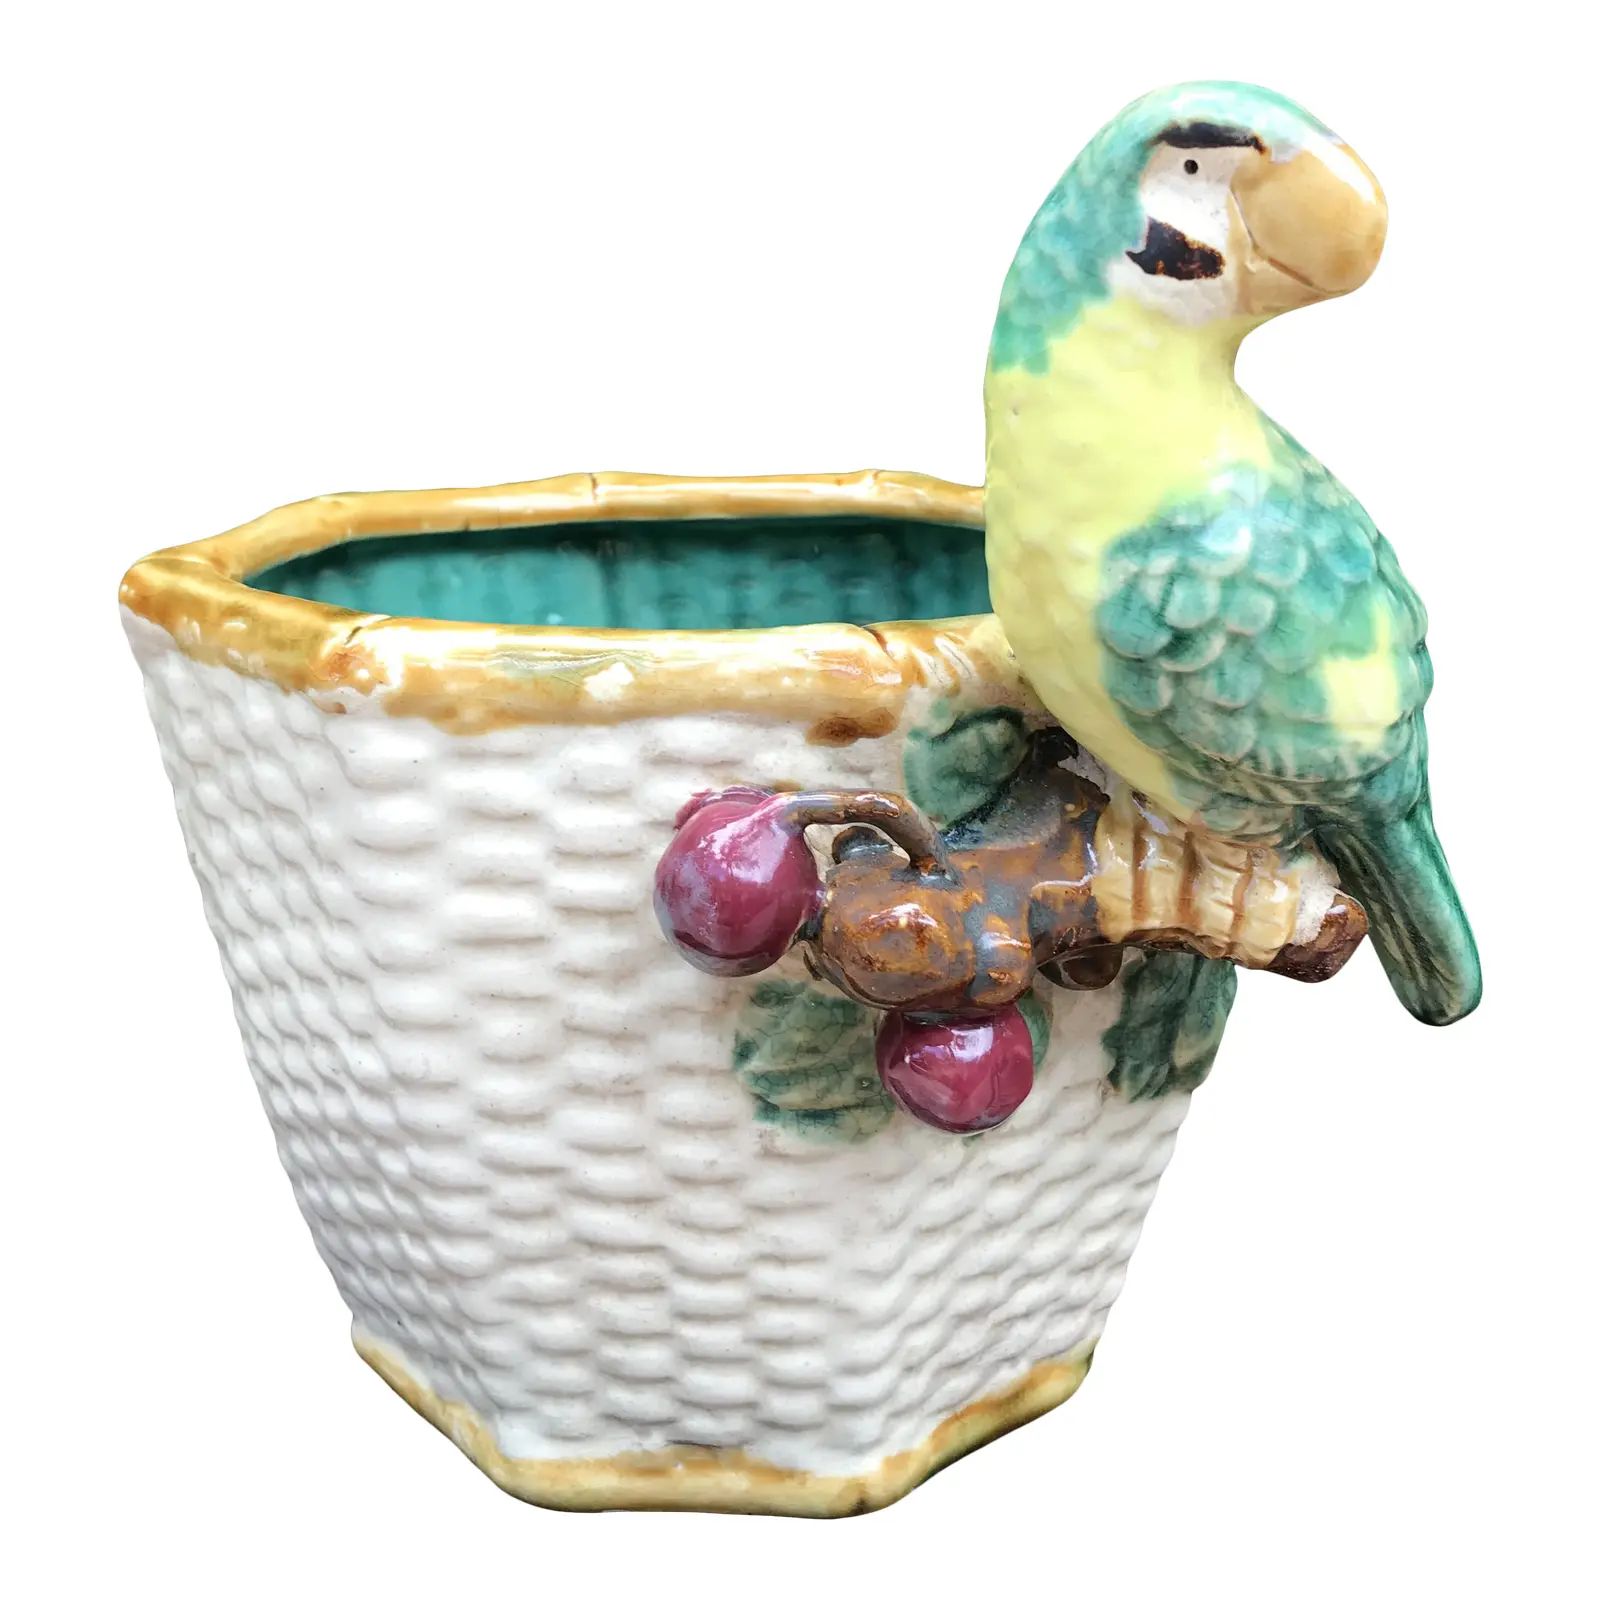 Early 20th Century Palm Beach Chic Chinese Shiwan Ceramic Planter With Parrot | Chairish